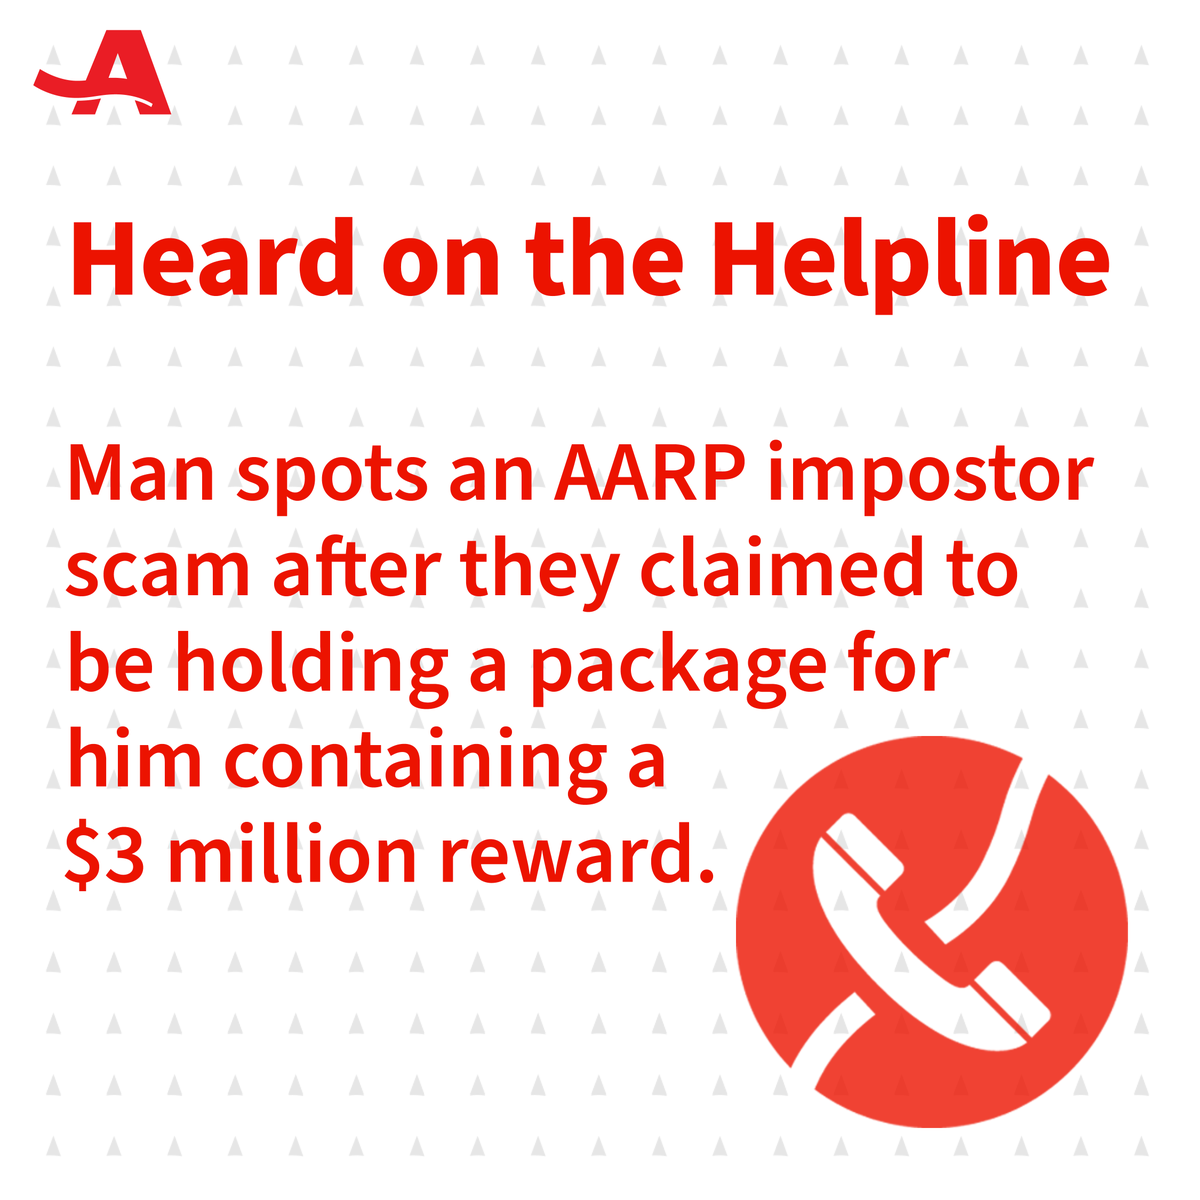 A man received a call from an AARP impostor who claimed they were holding a package for him containing a $3 million reward. The caller knew it was a scam and reported it to AARP. If you spot a scam, report it to @aarpfraudwatch at 877-908-3360.